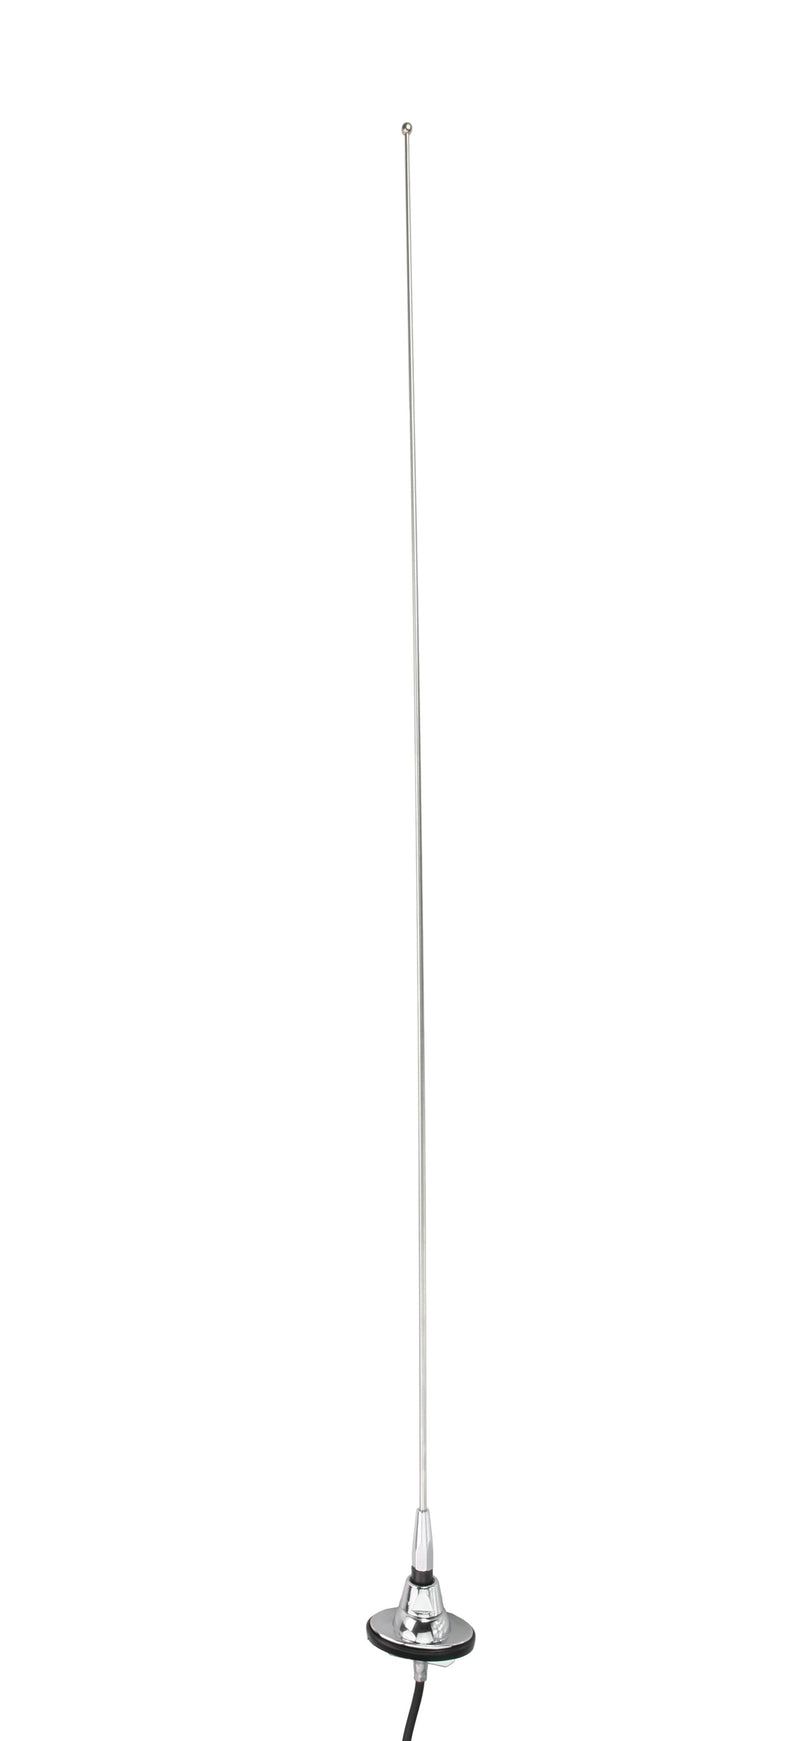 Universal 1965-85 Ford Replacement Antenna with Oval Base